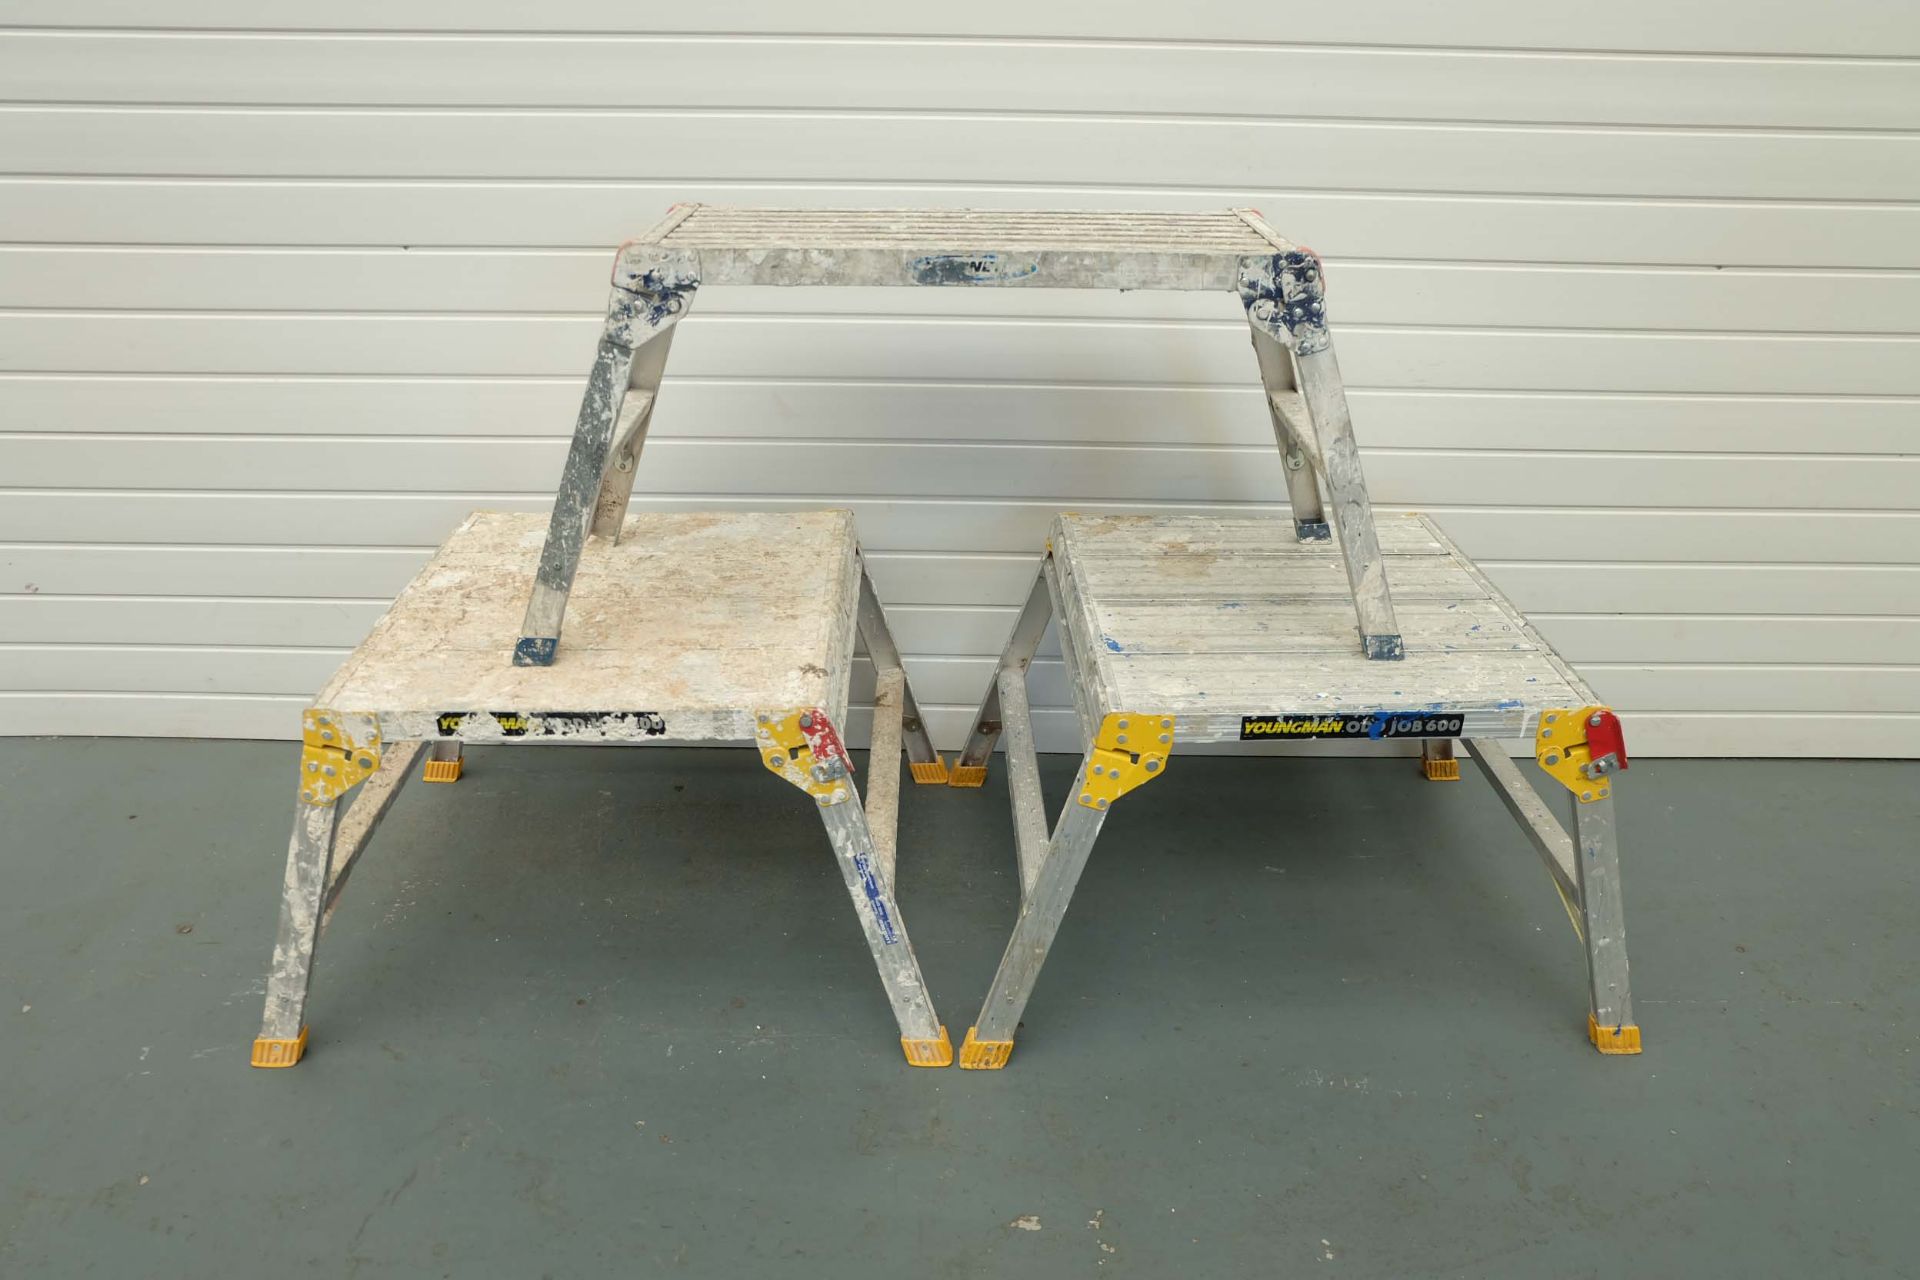 3 x Aluminium Platforms. 2 x Youngman 600 x 600mm. Height: 500mm. And Werner 700 x 300mm.